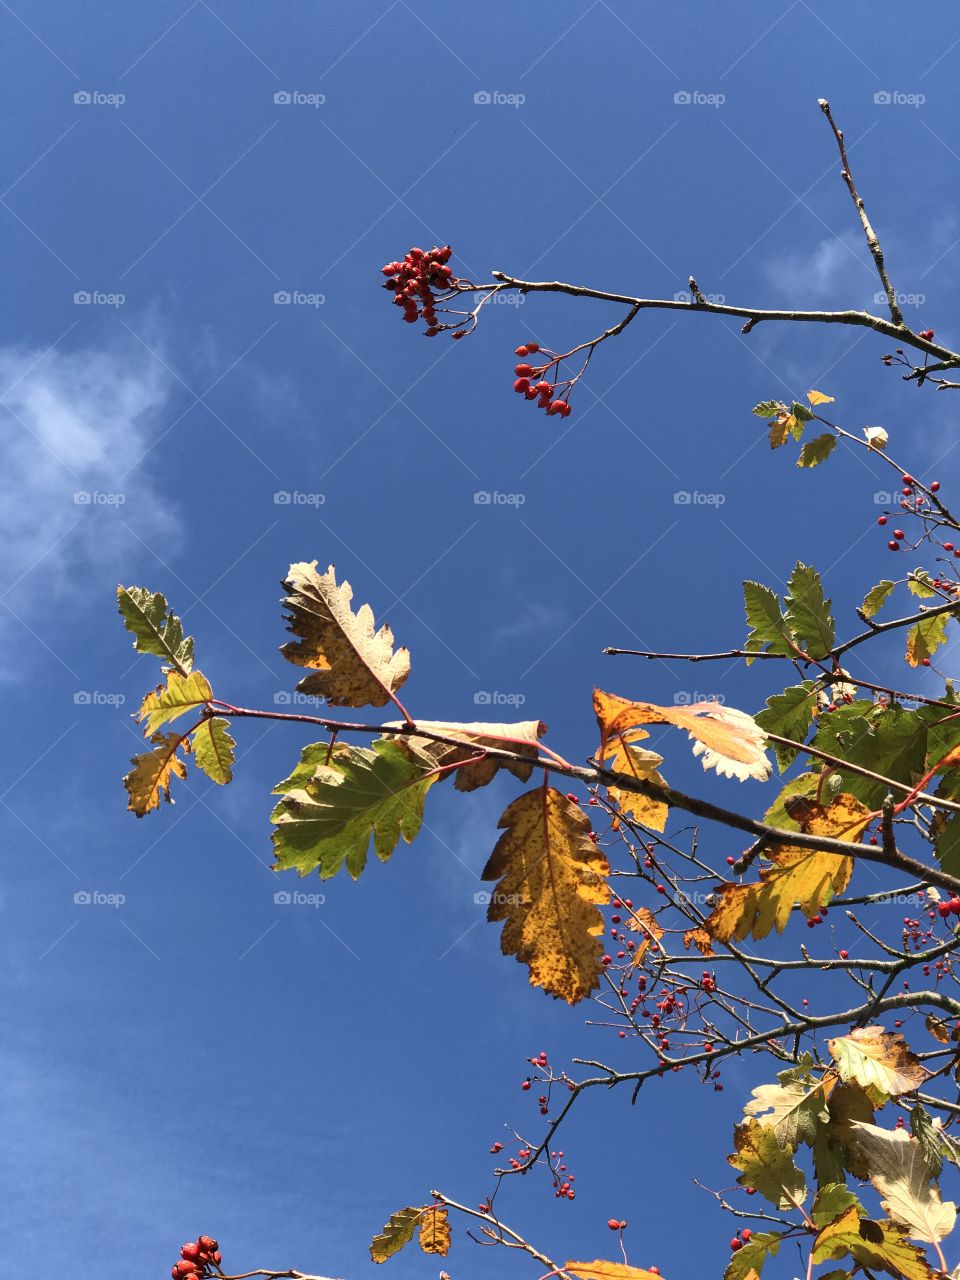 Looking upwards at leaves and berries of a rowan tree in autumn against clear blue sky